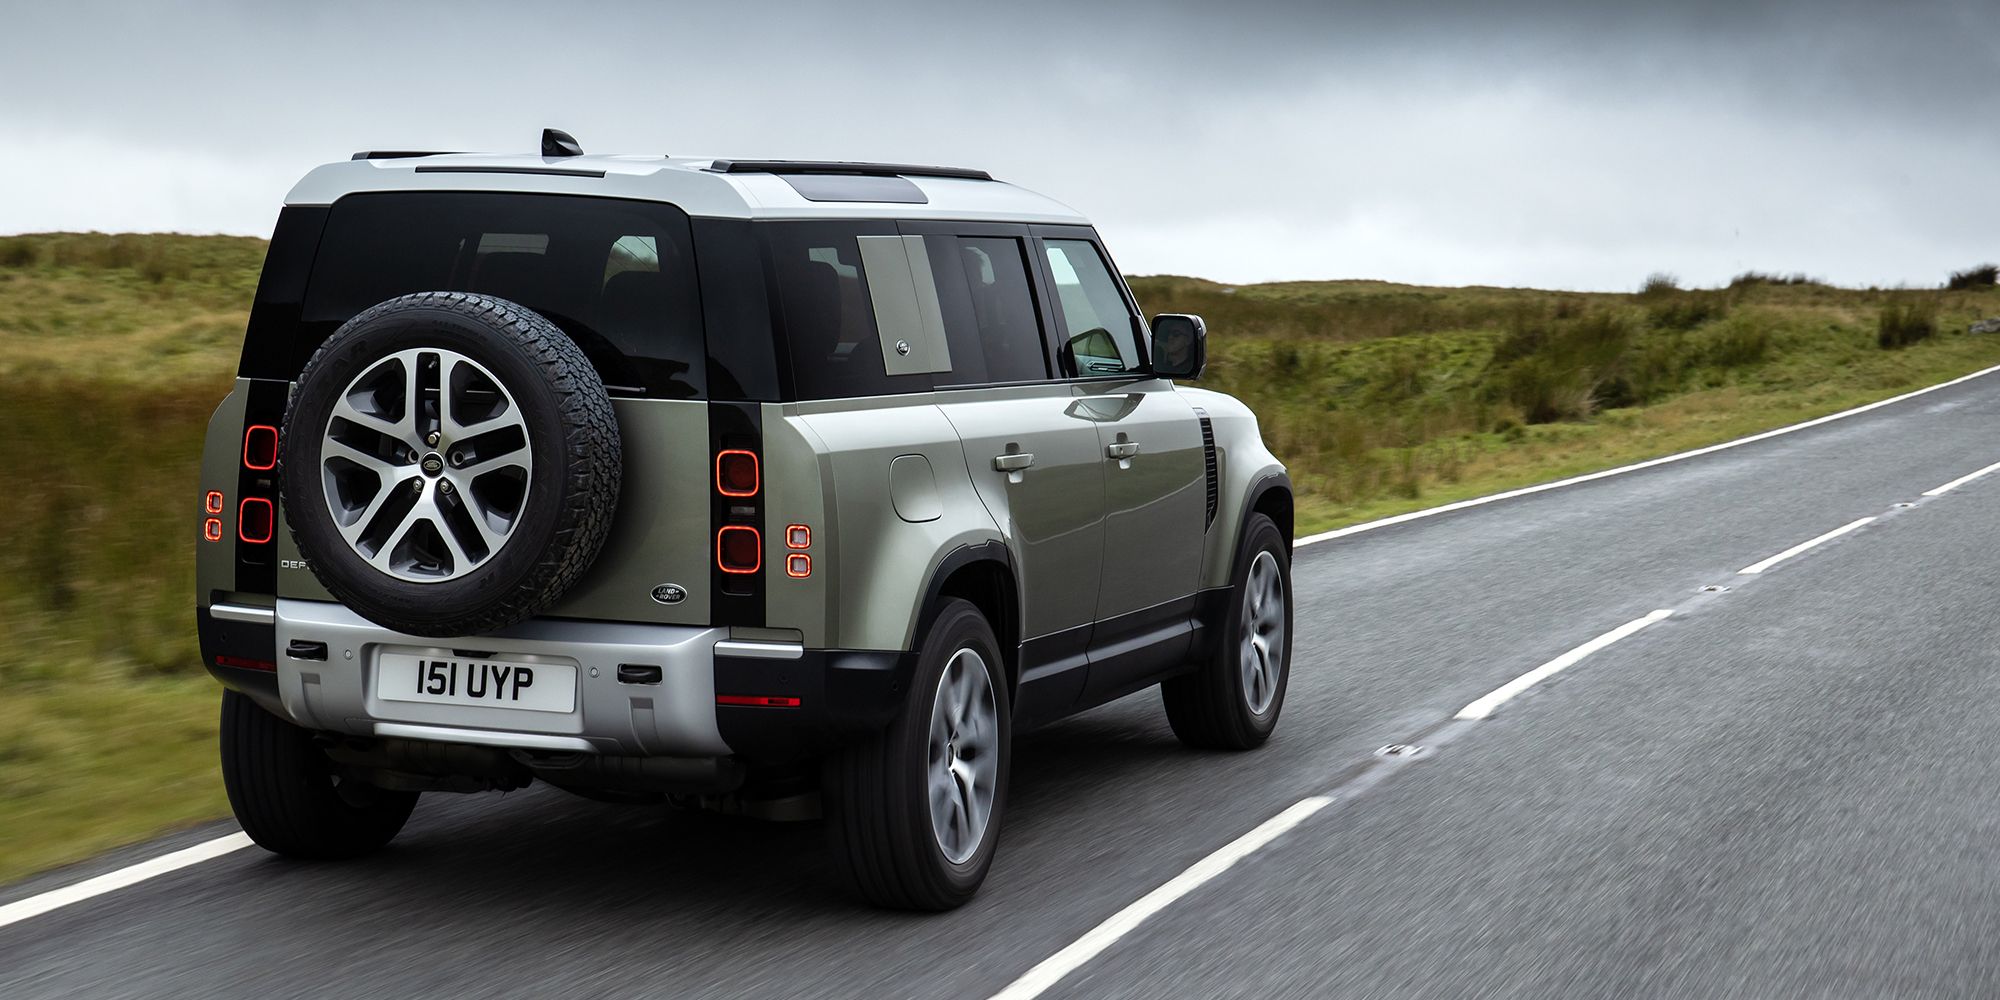 The rear of the new Defender 110 on the move